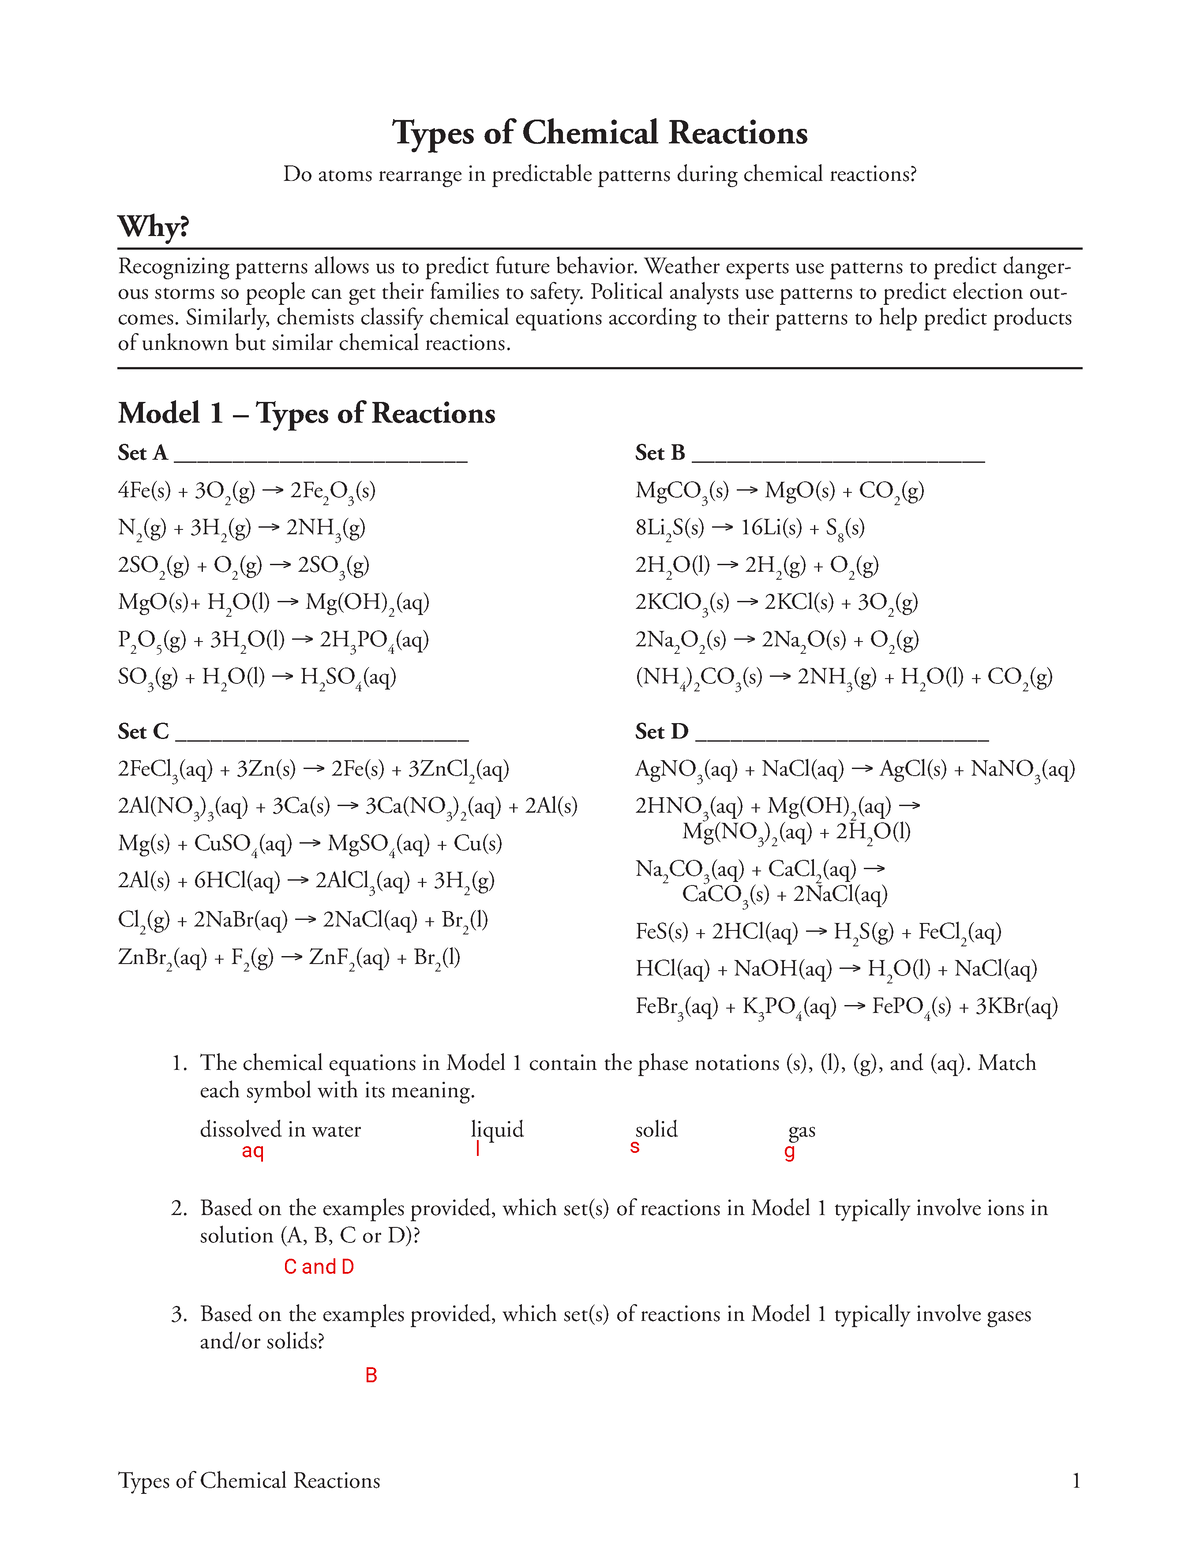 Types of chemical reactions POGIL - Types of Chemical Reactions 20 With Classification Of Chemical Reactions Worksheet